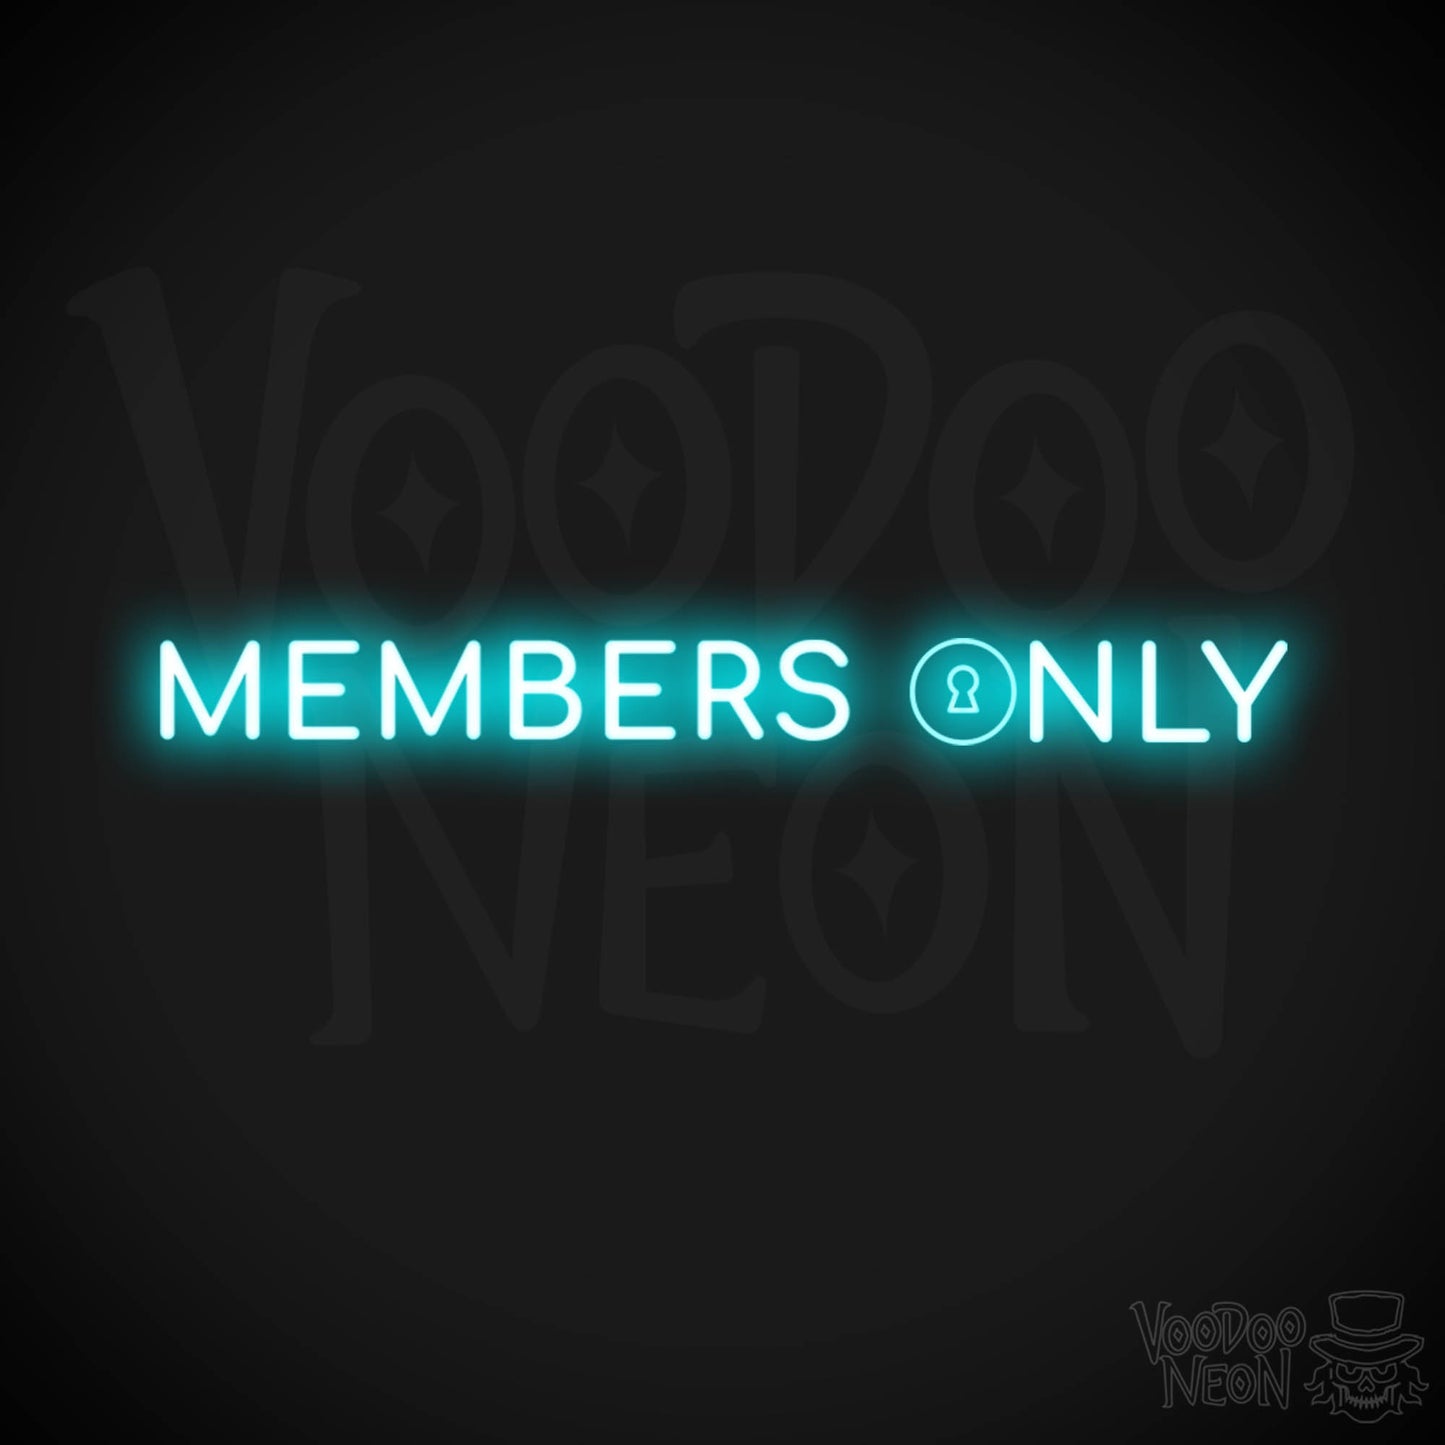 Members Only Neon Sign - Neon Members Only Sign - Color Ice Blue